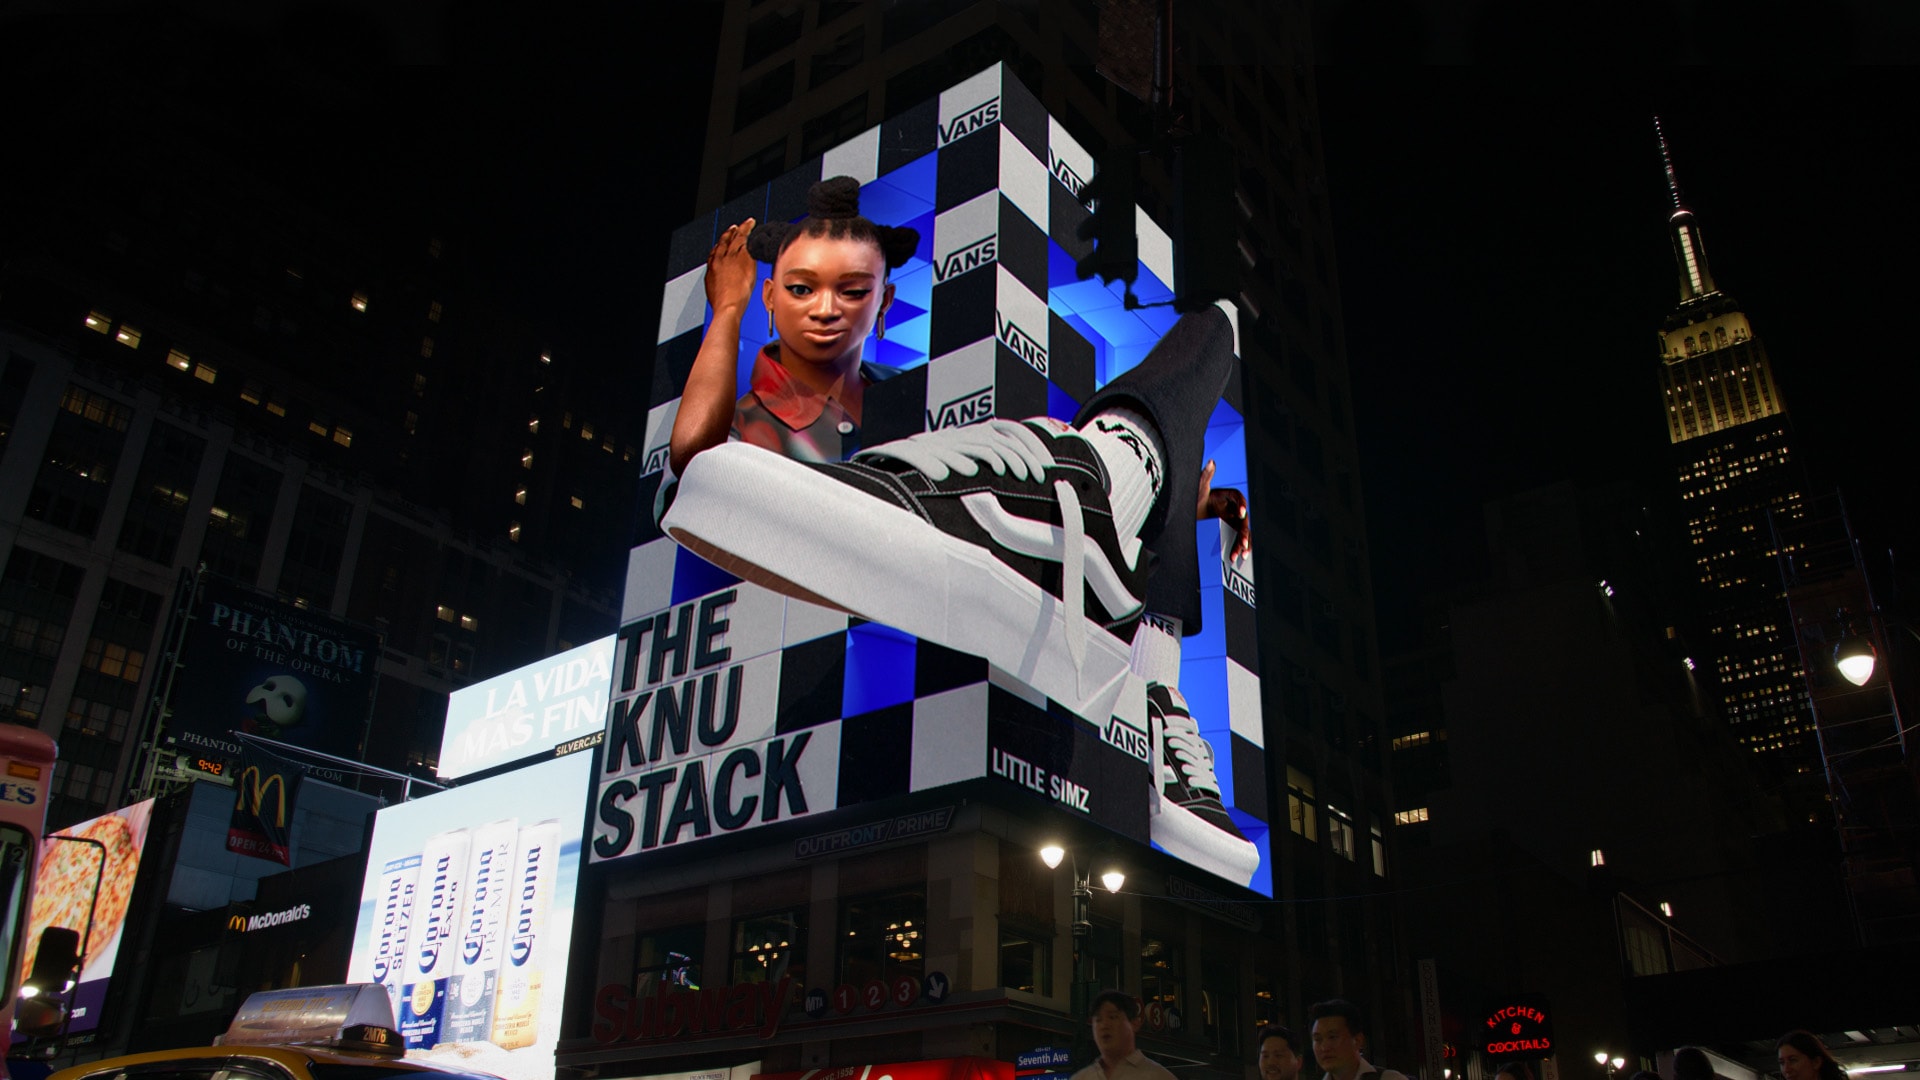 Motionographer® Ultimate Frontier Helps Launch Vans ‘Knu Stack’ With Eye-Popping 3D Billboard in NYC